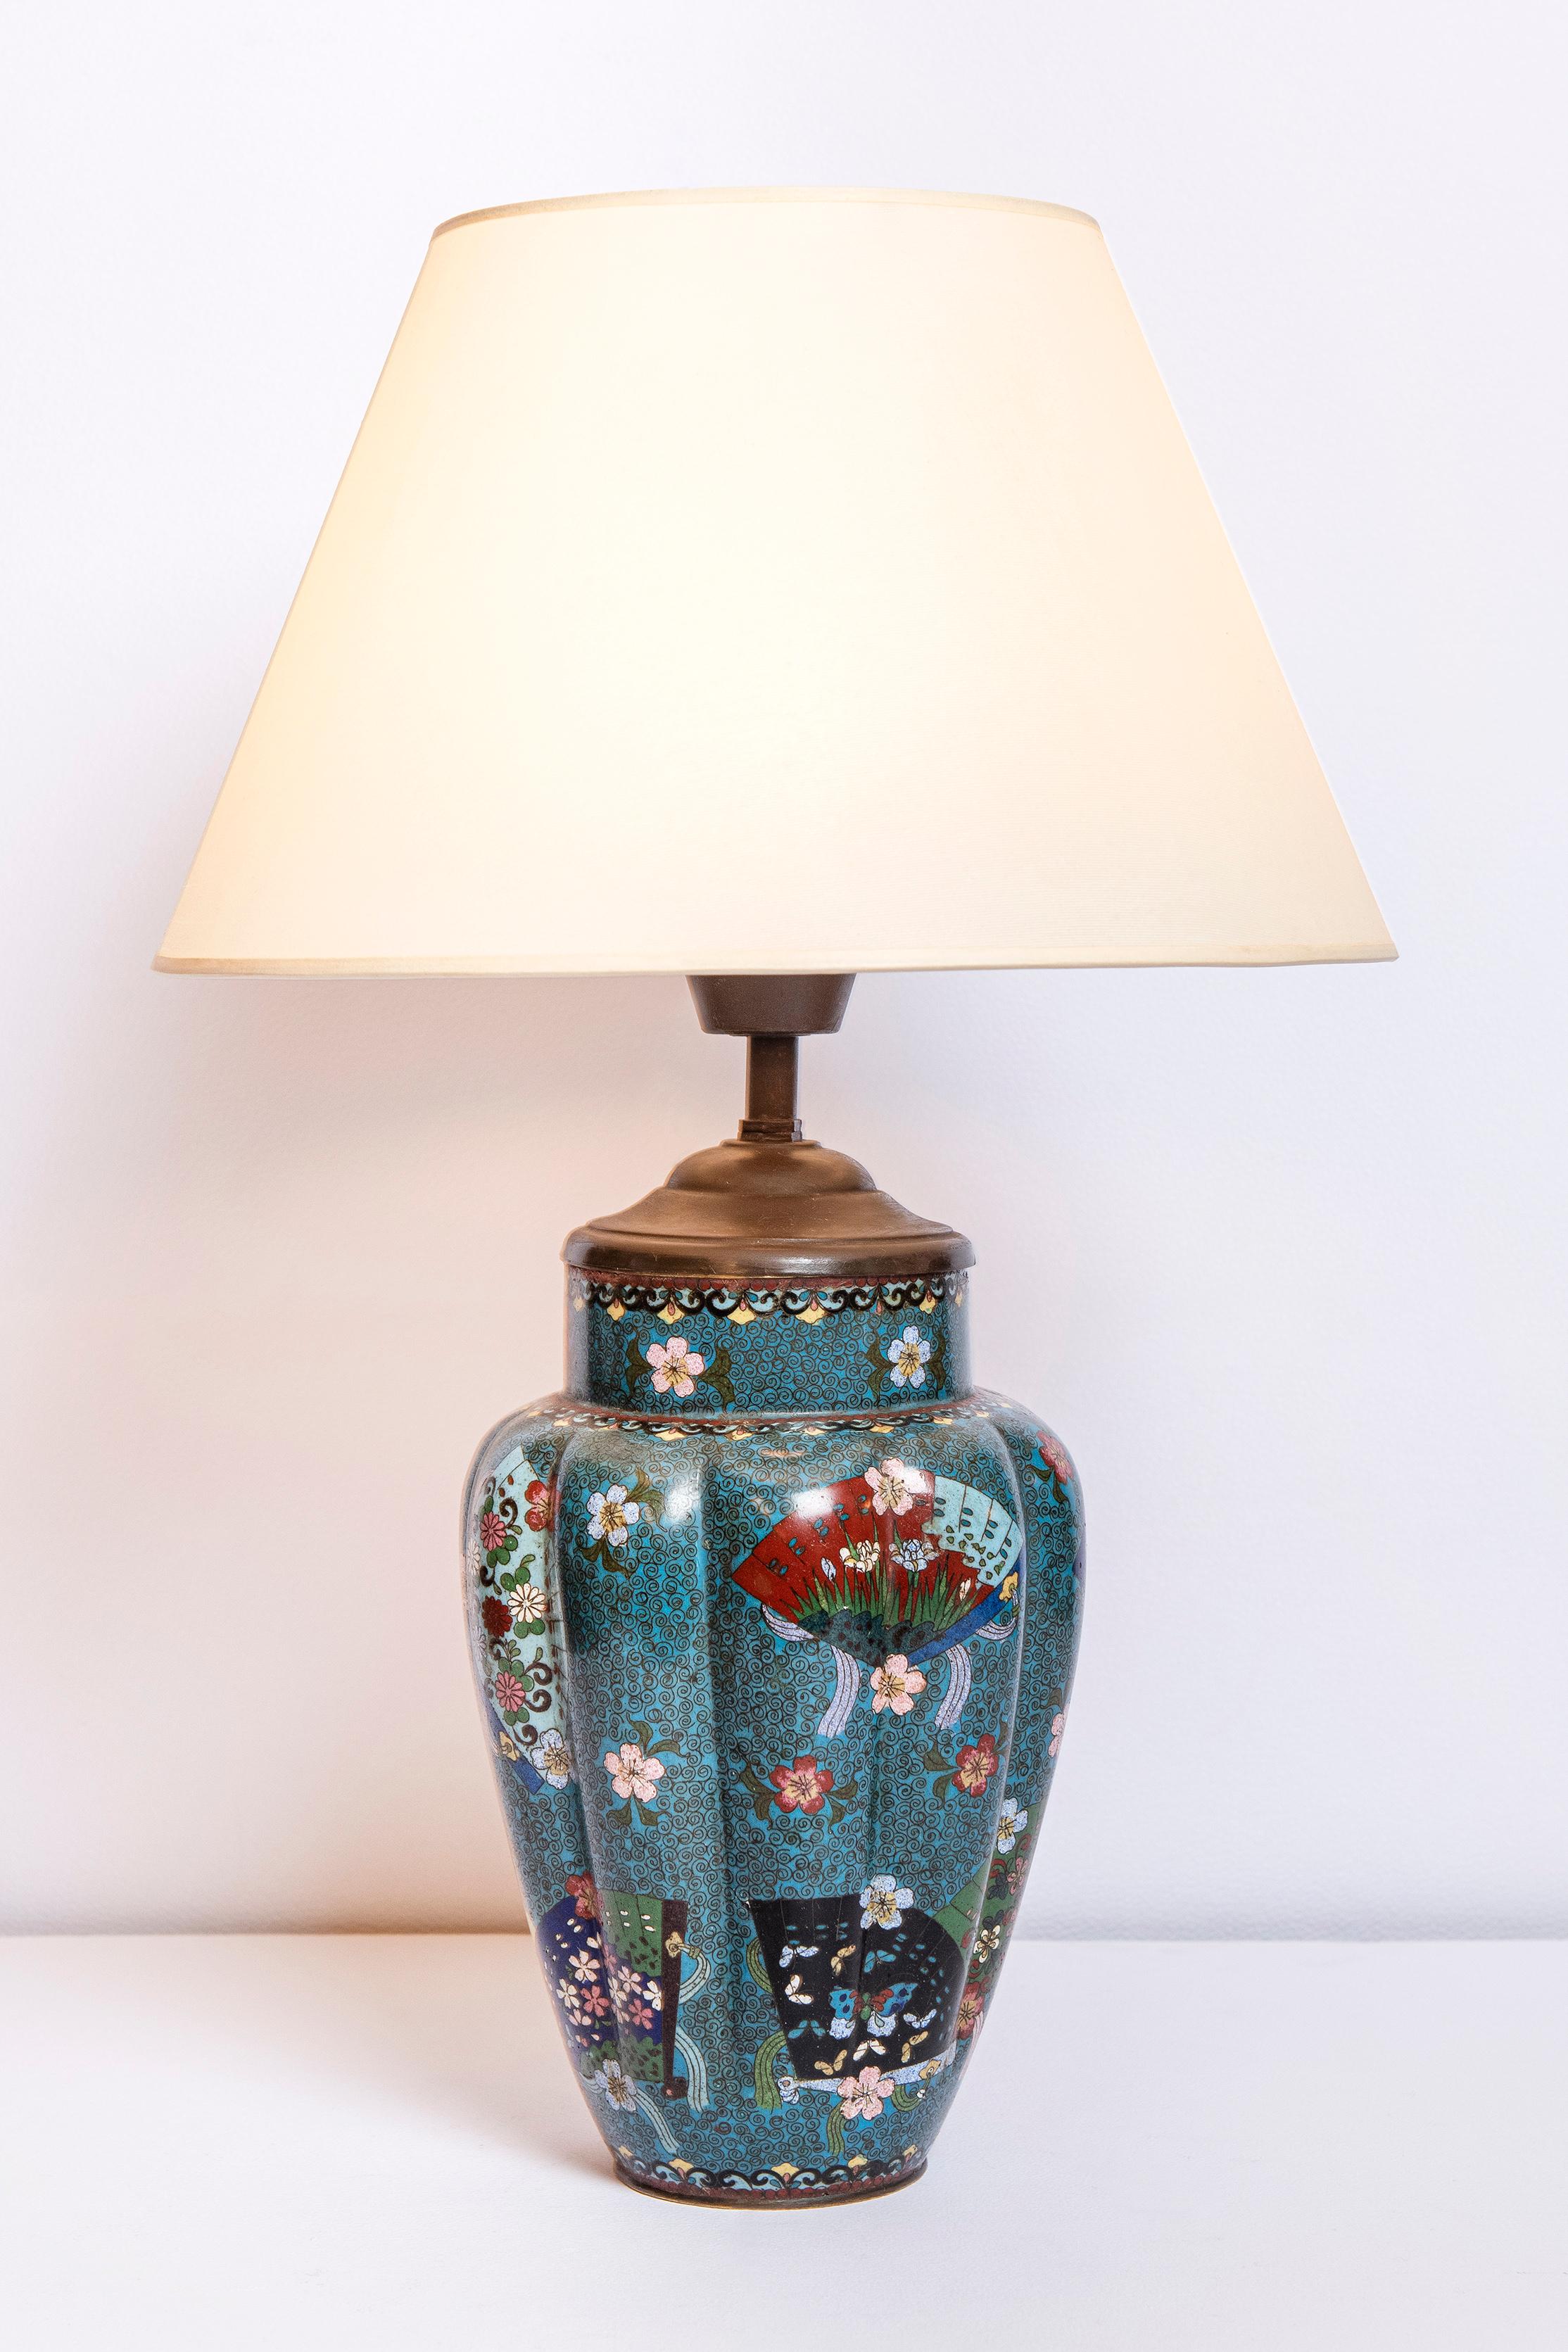 Pair of cloisonné table lamps. Japan, late 19th century.

Measure: Height with shade: 50 cm.